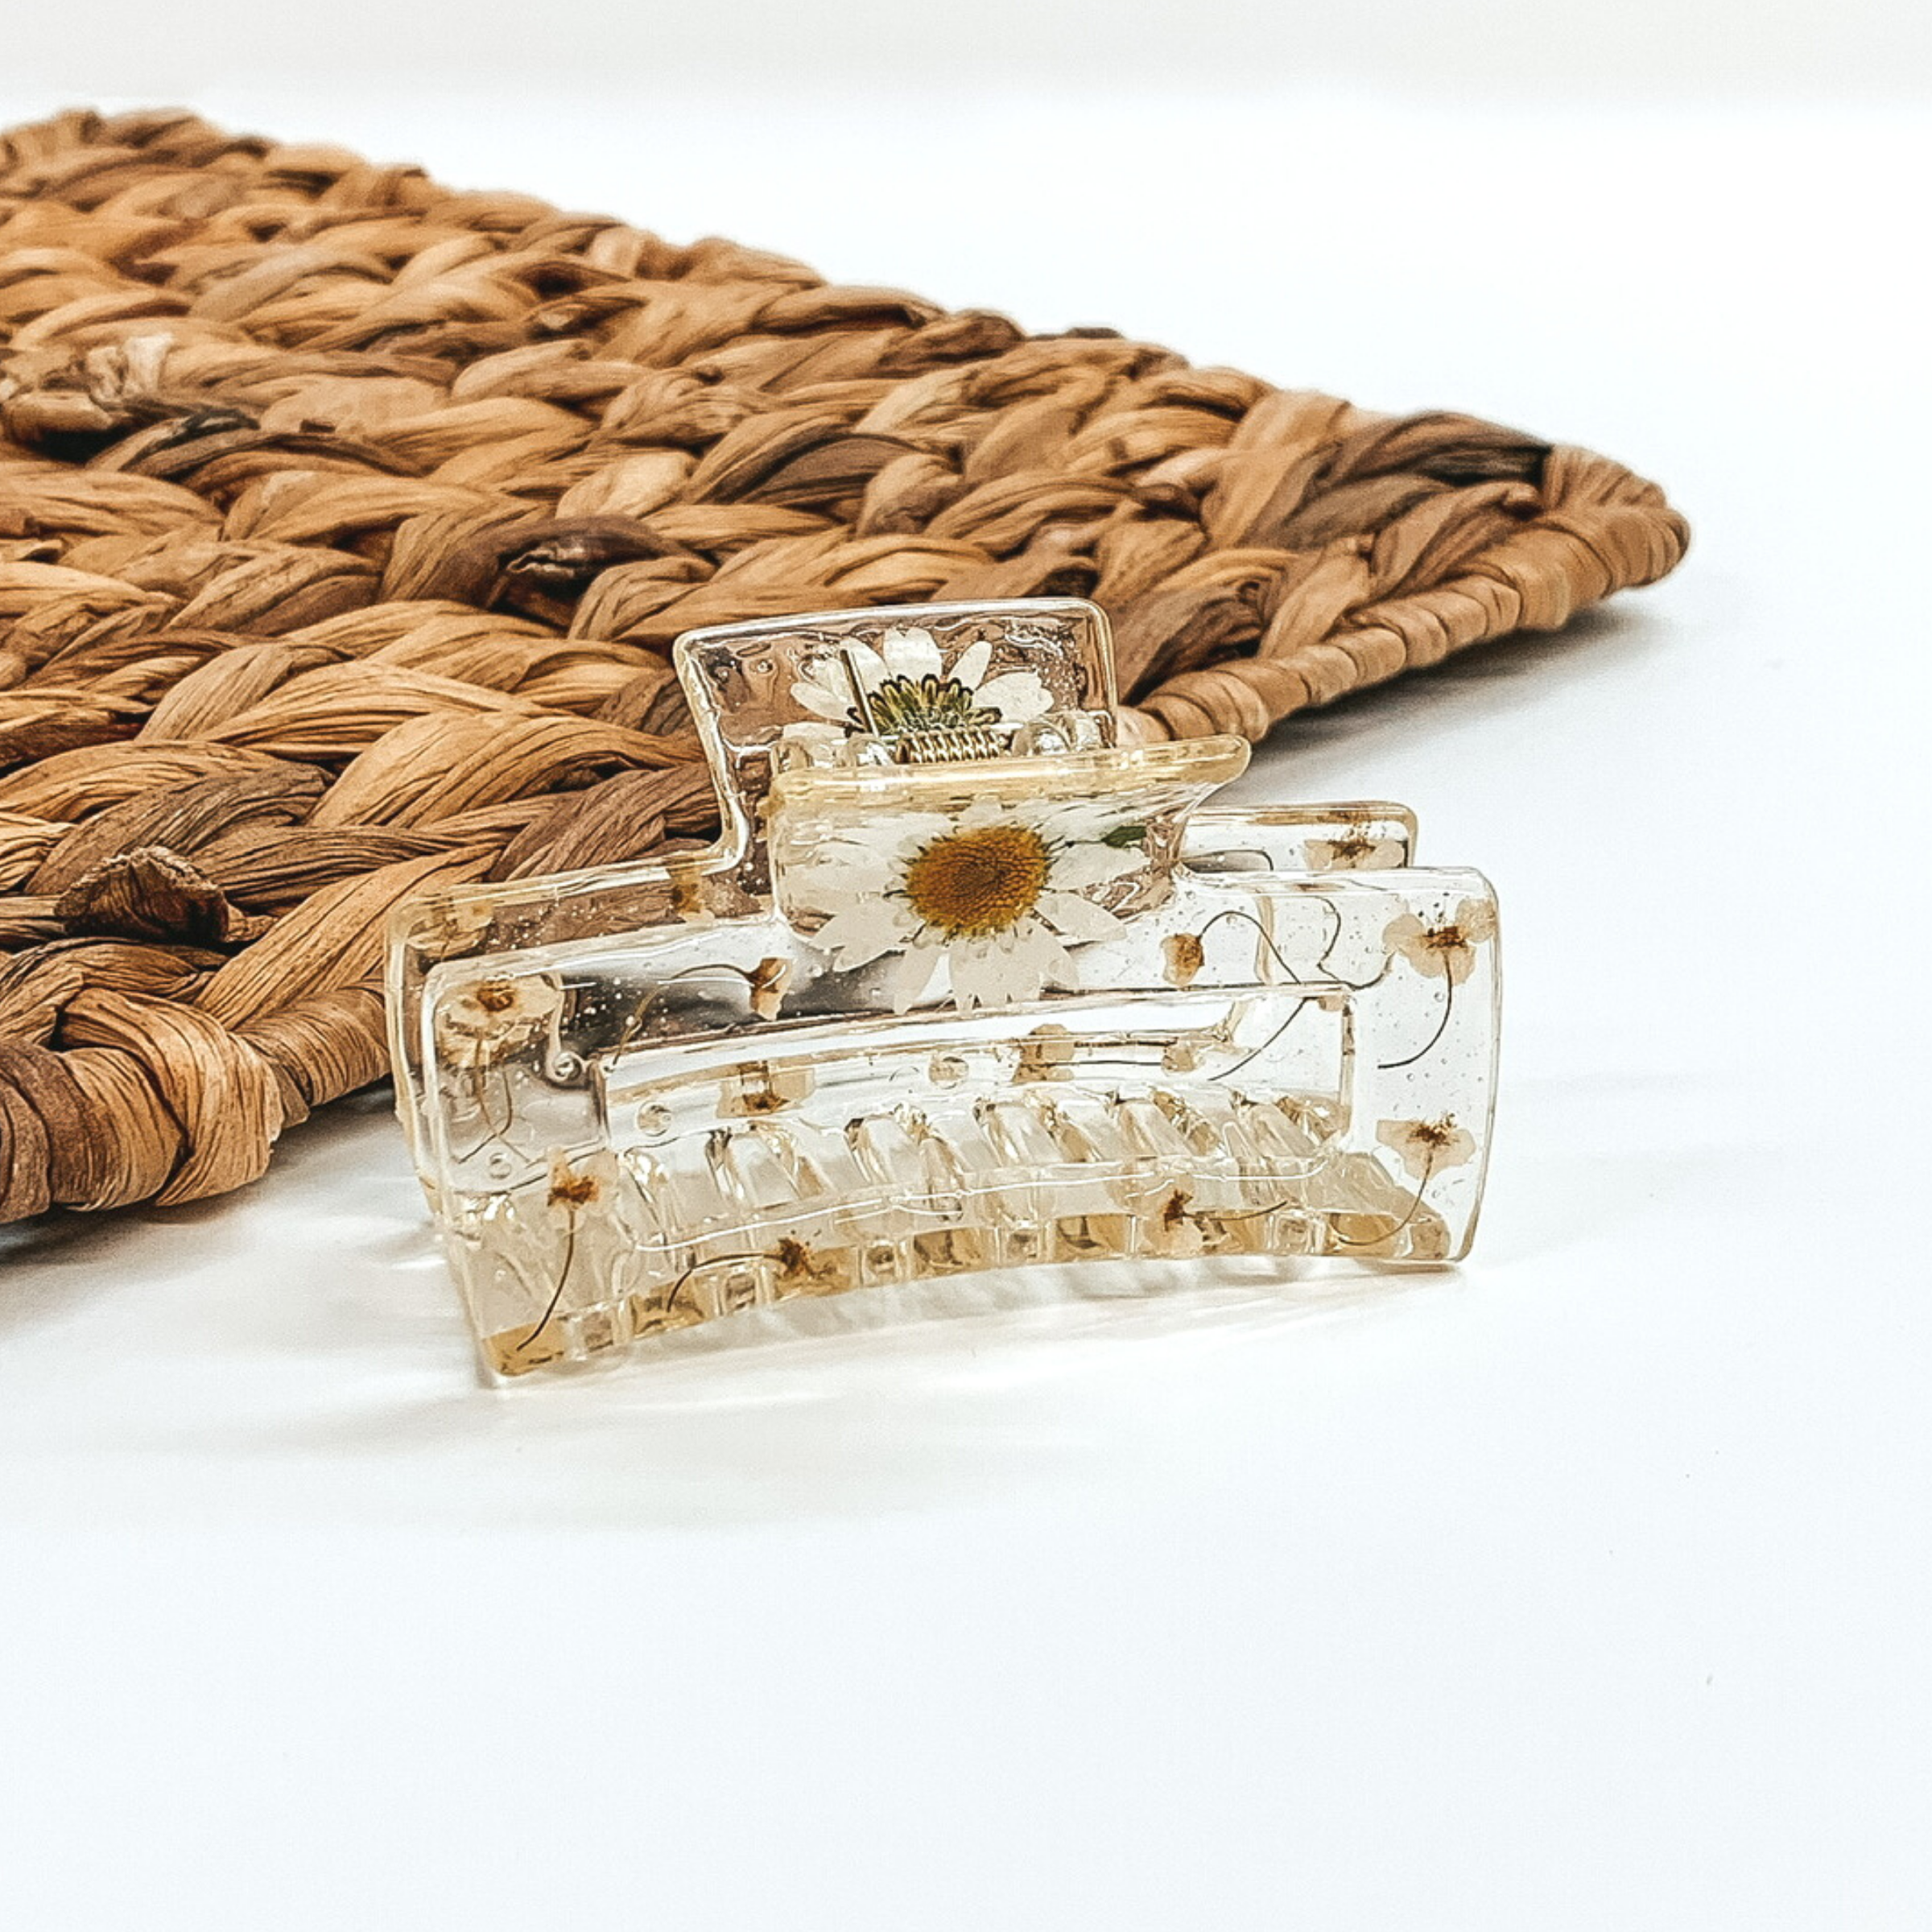 Clear rectangle clip, that has white pressed flowers inside the clip. This clip is pictured on a white background with basket weave behind it.